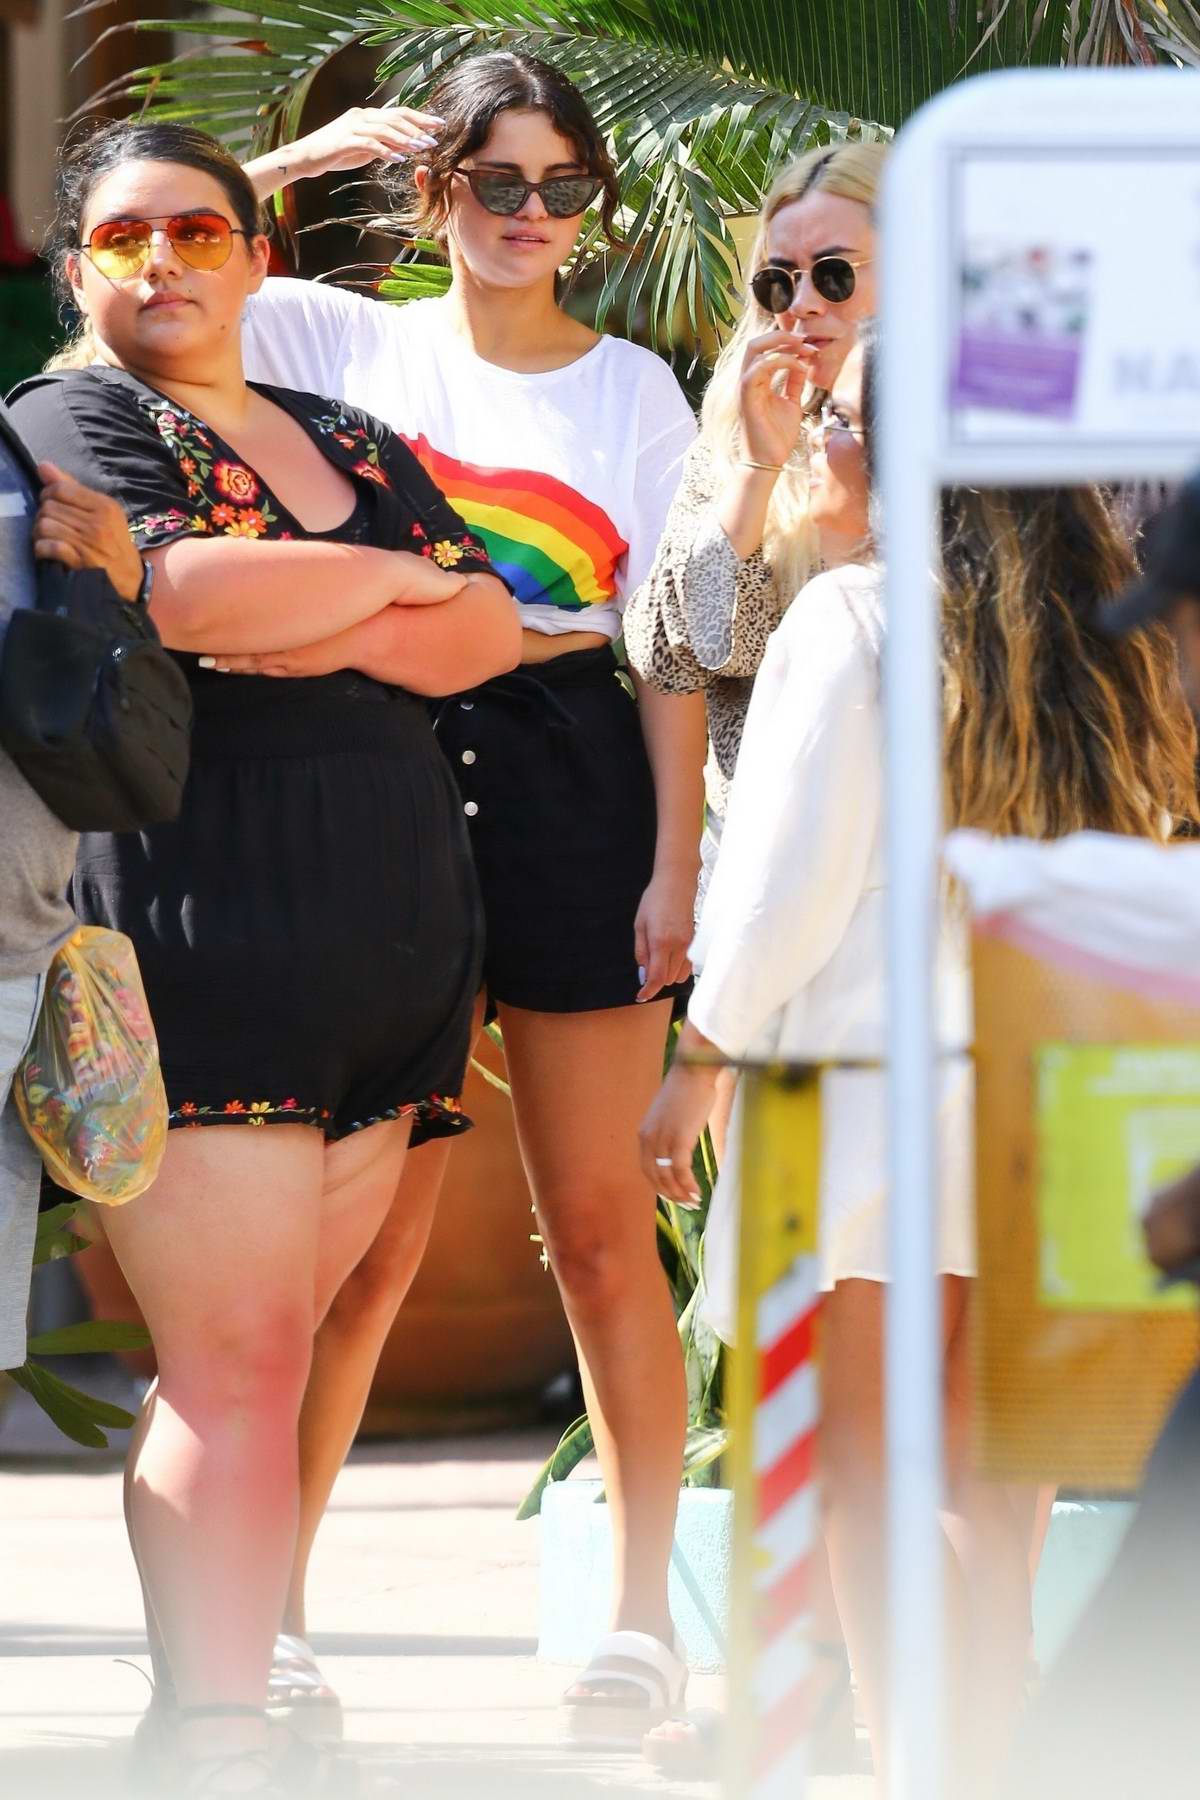 selena gomez enjoys a day out with her friends at sayulita vilage while